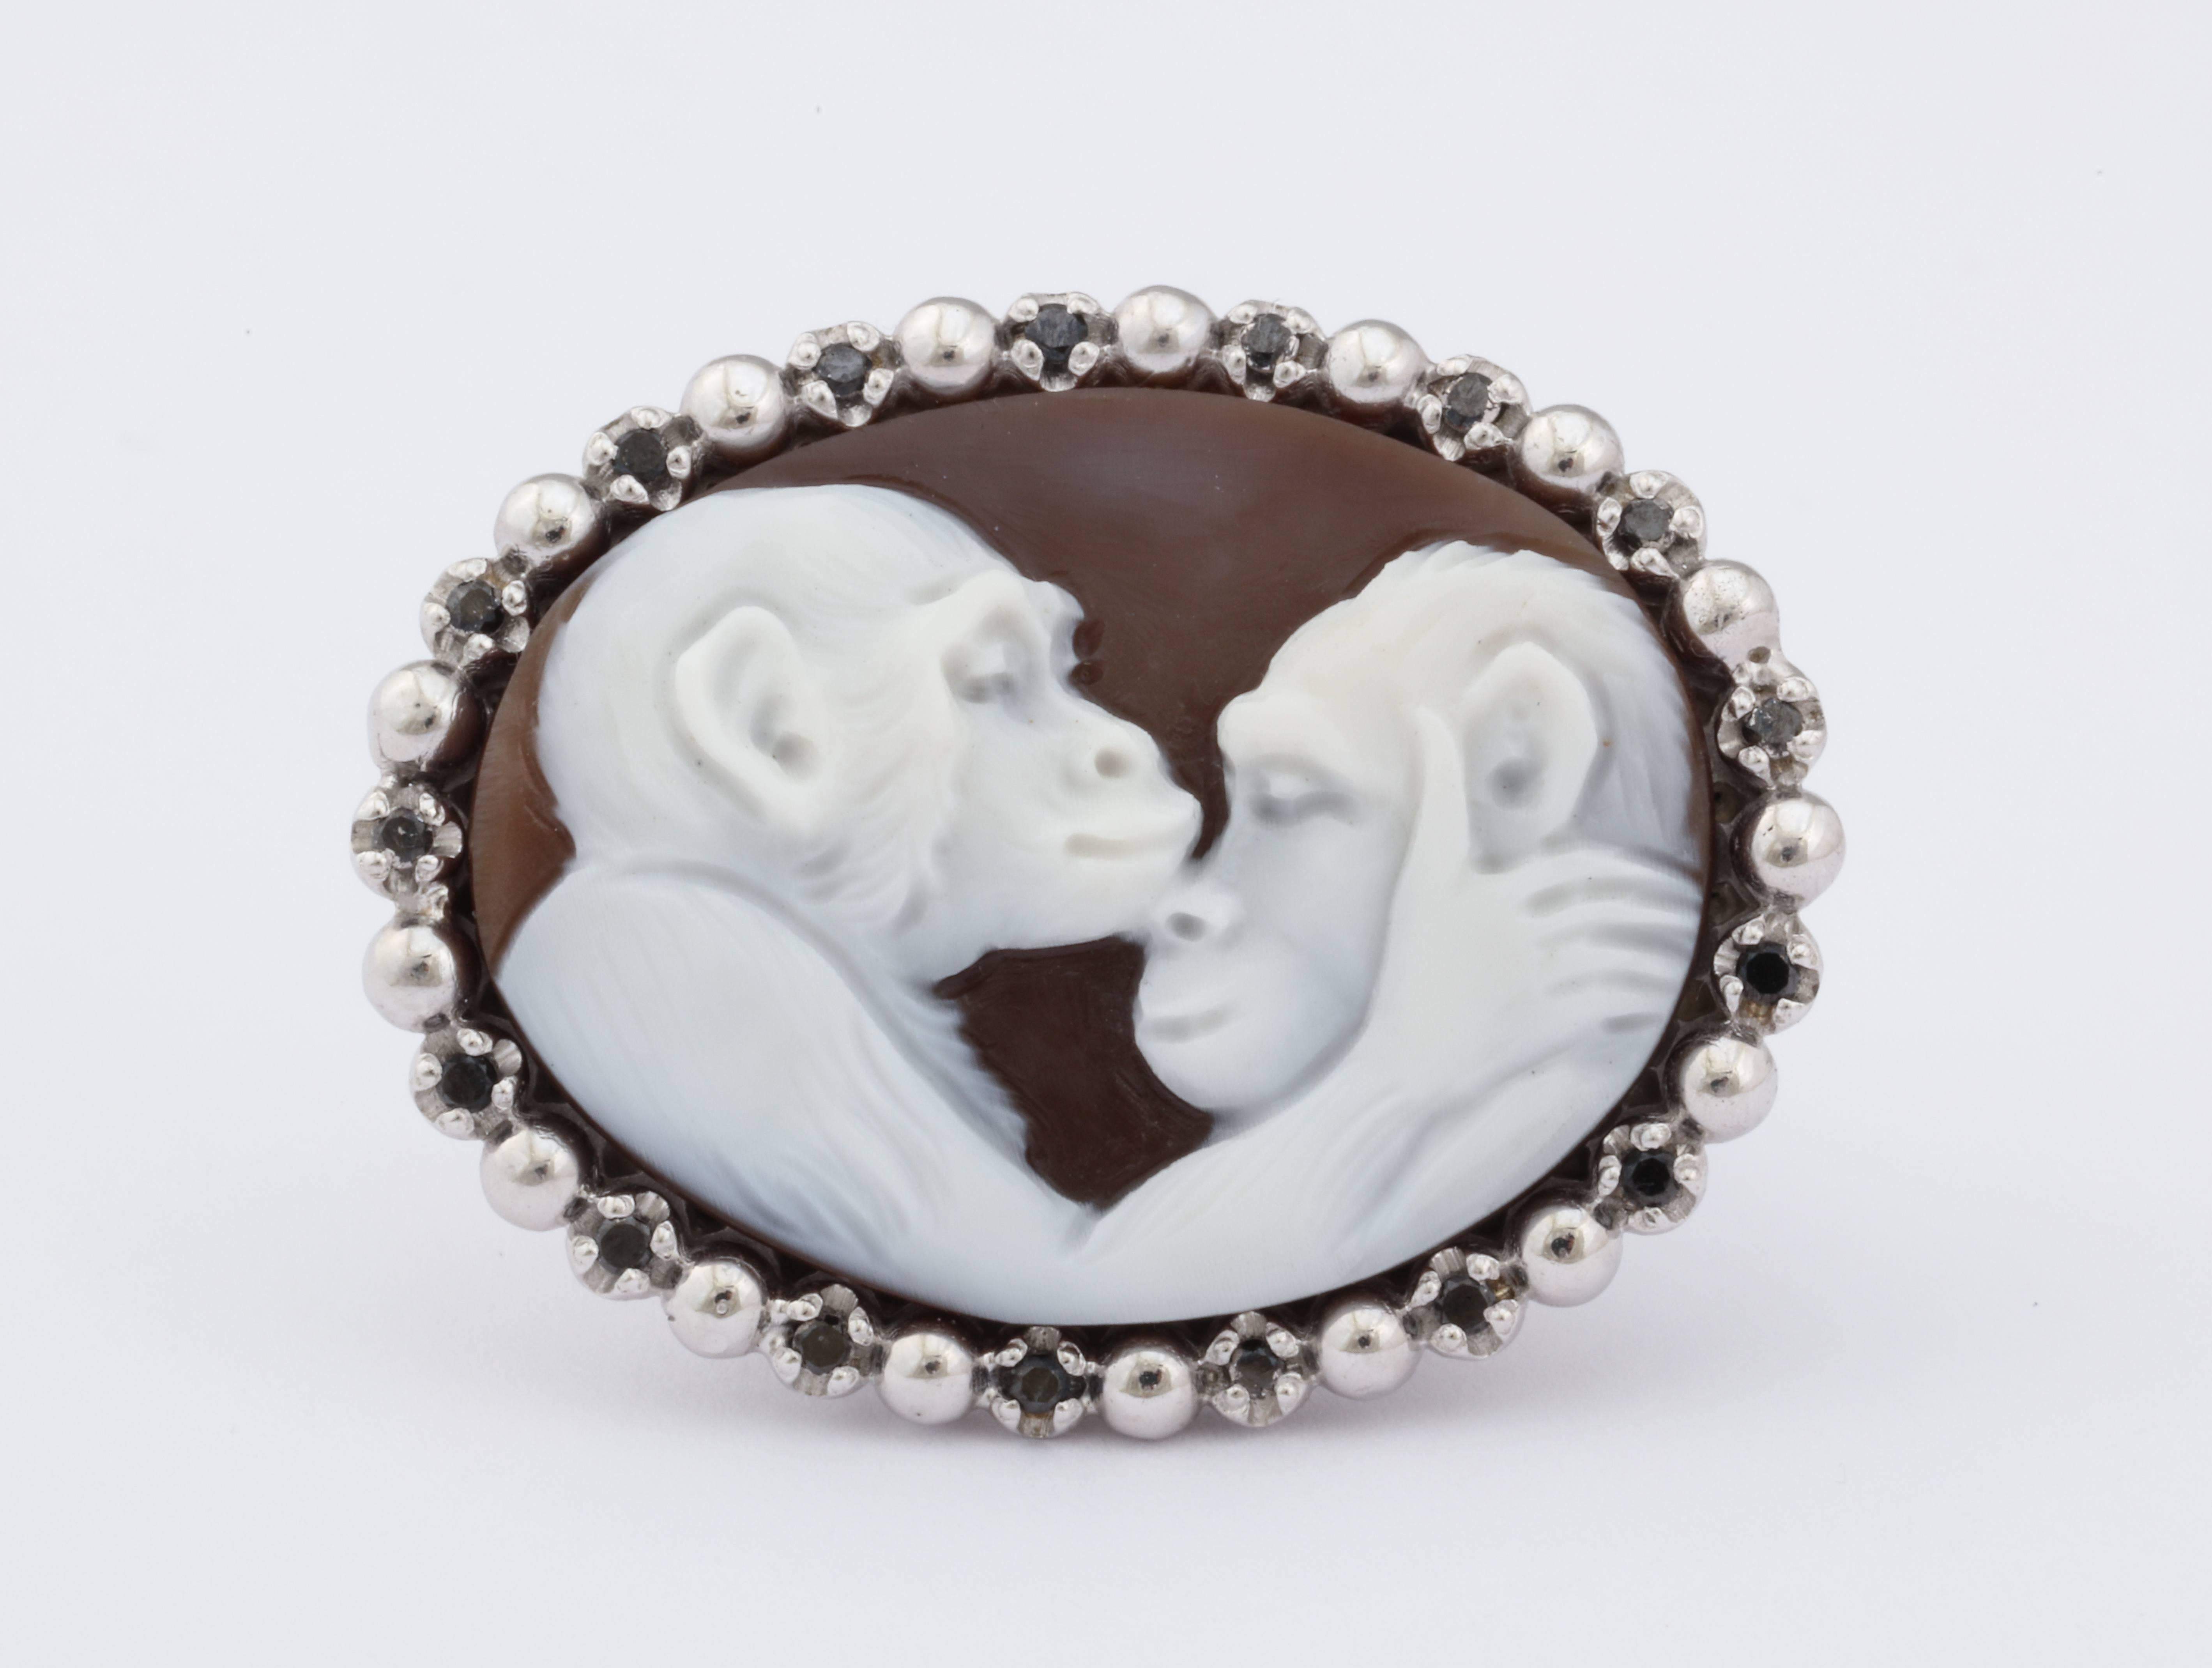 30mm sardonyx shell cameo hand-carved, set in sterling silver, white rhodium with black diamonds.